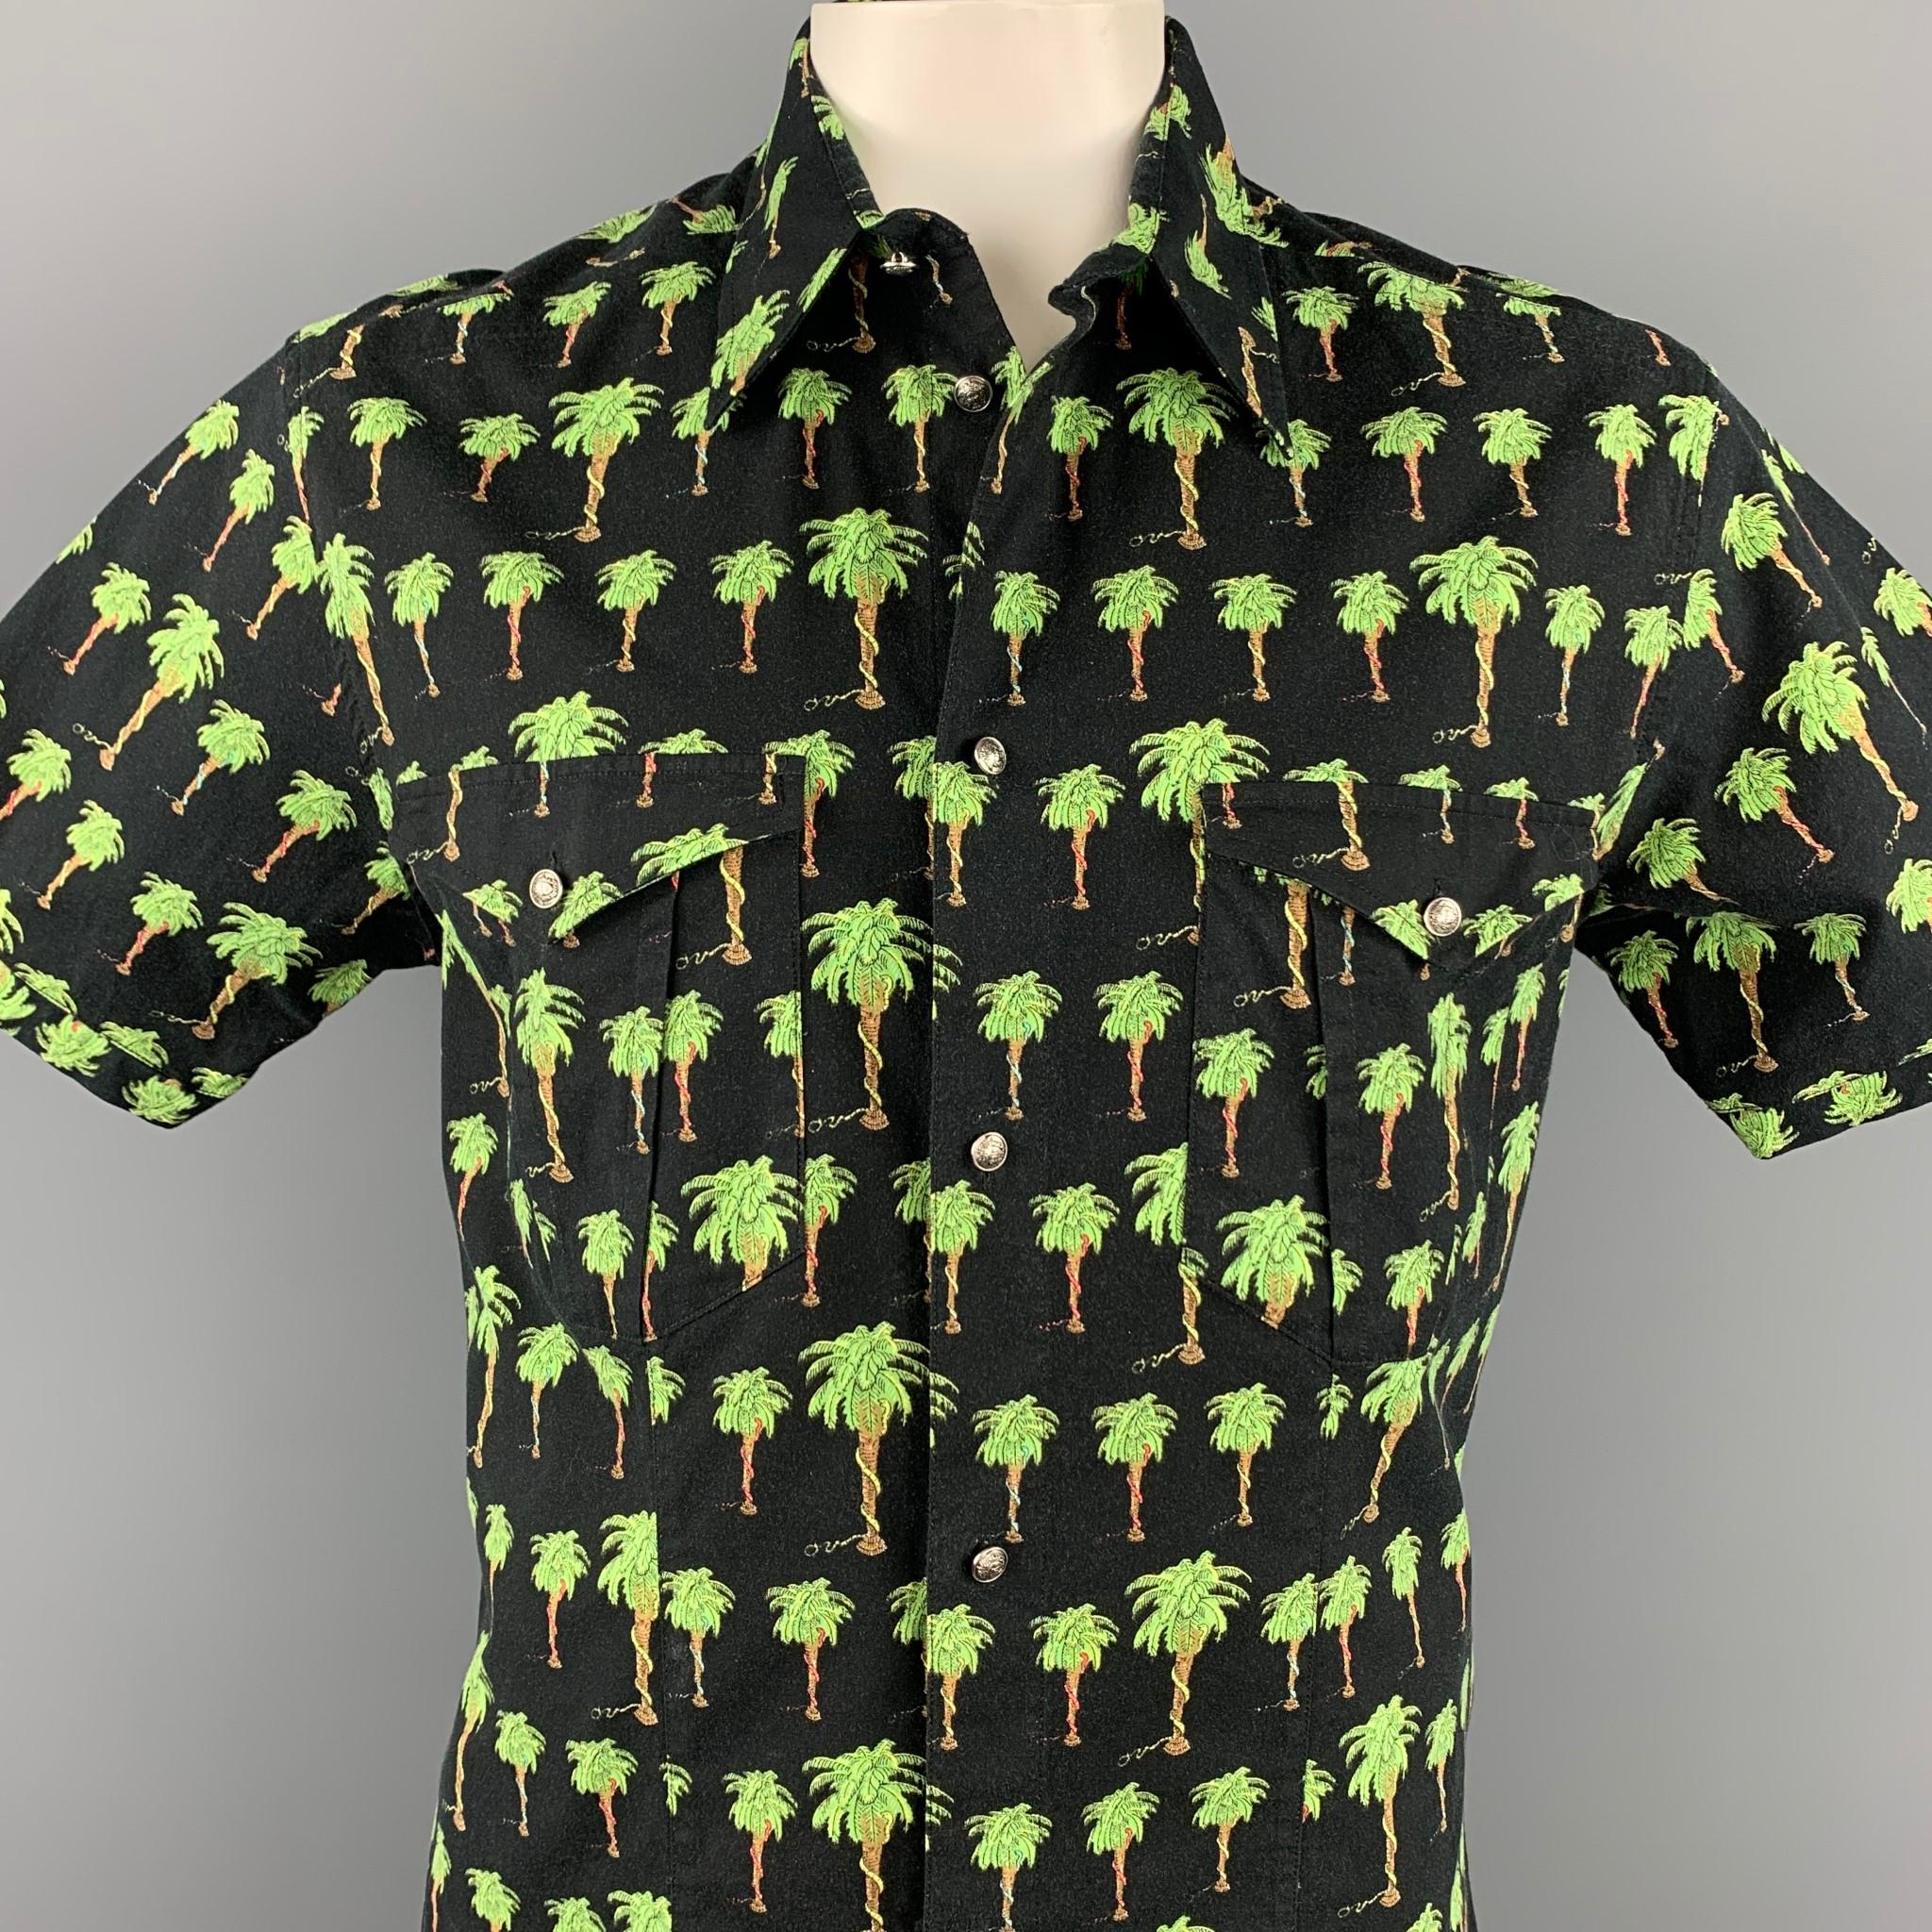 VERSACE JEANS COUTURE short sleeve shirt comes in a black & green palm tree print cotton blend featuring silver tone medusa buttons, front pockets, and a spread collar. Made in Italy.

Very Good Pre-Owned Condition.
Marked: